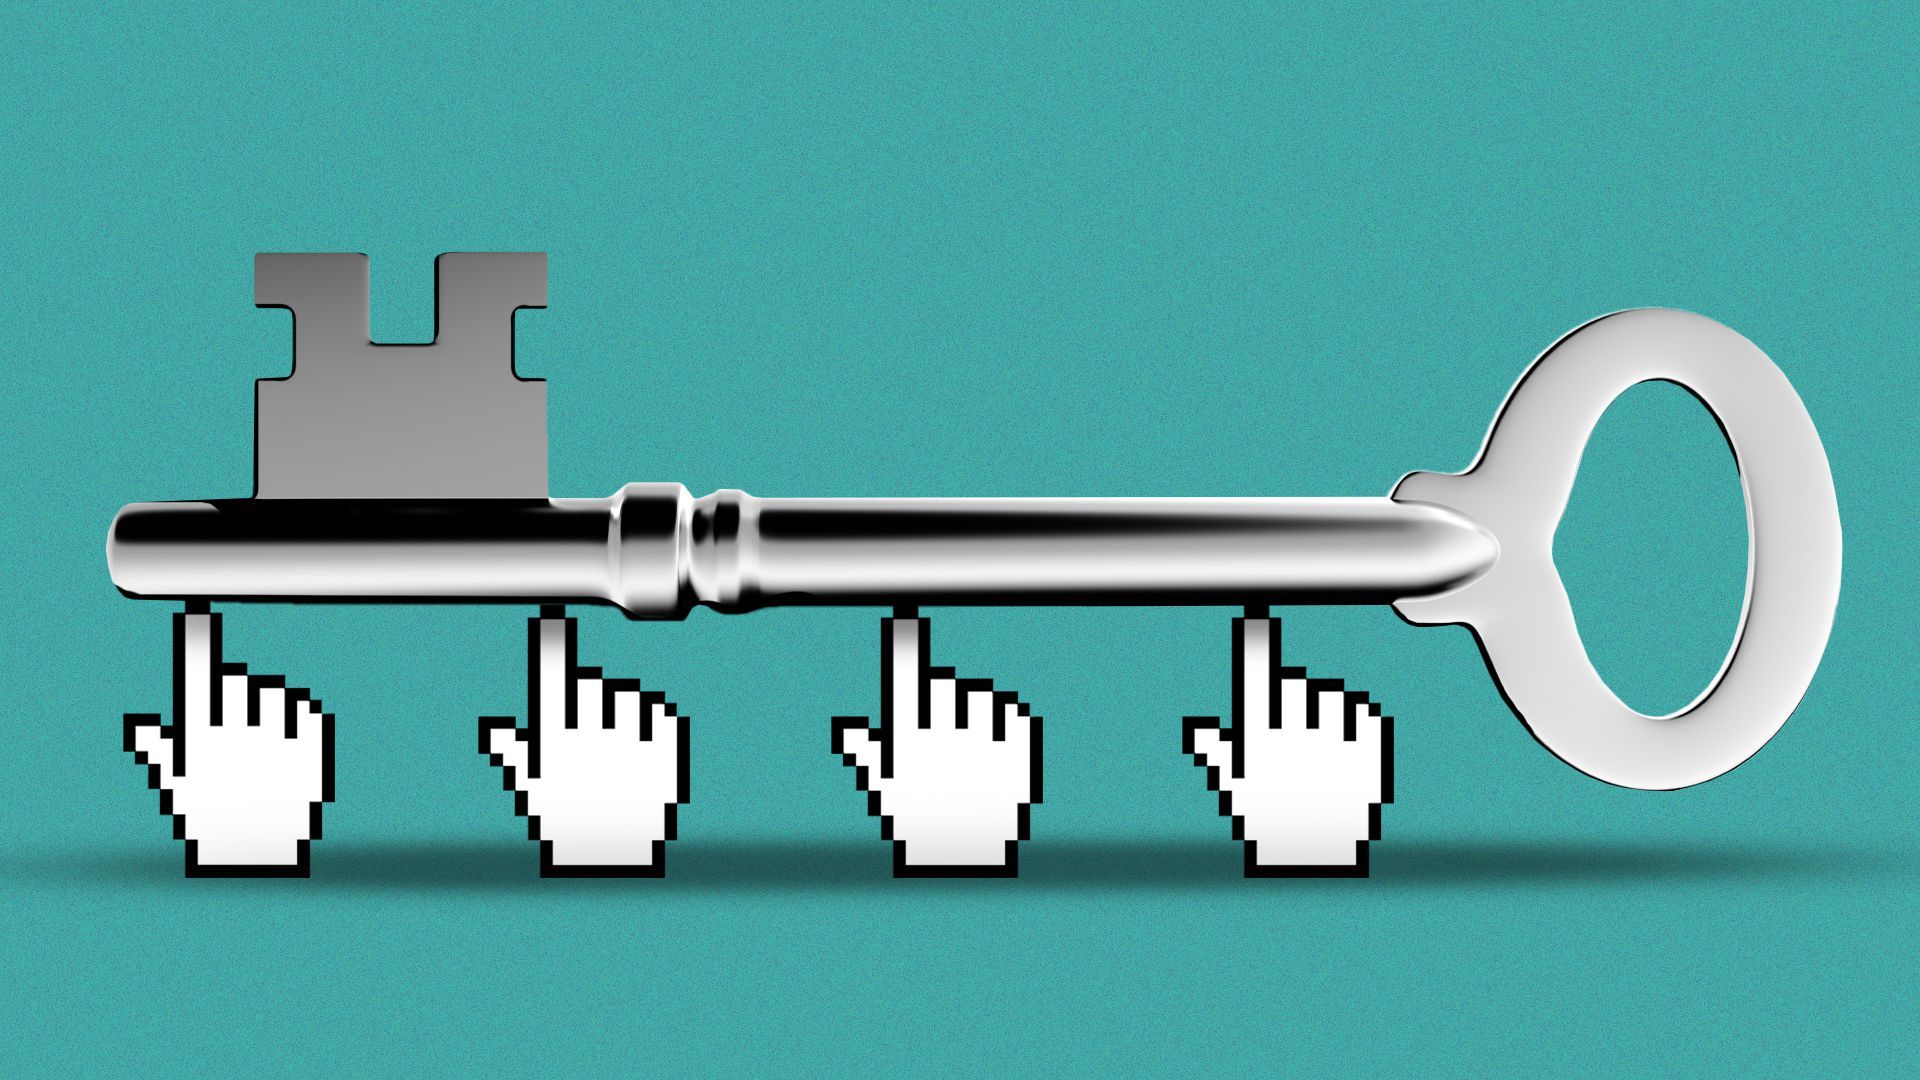 Illustration of four small cursor hands holding up a large metal key